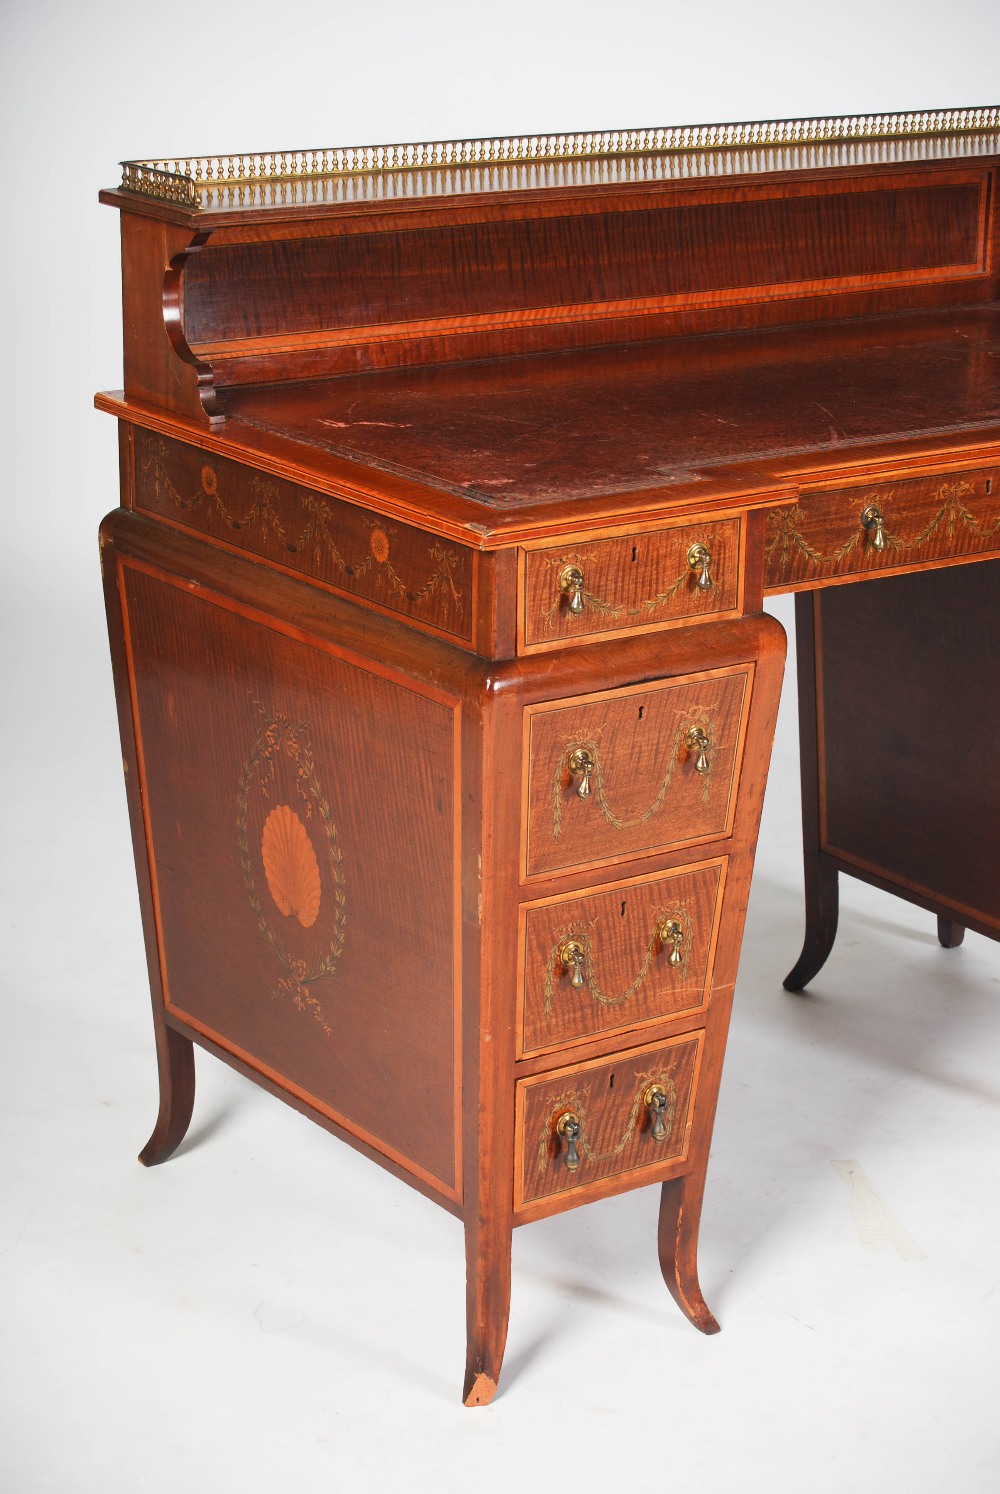 An Edwardian mahogany and satinwood banded pedestal desk by Edwards & Roberts, with raised gallery - Image 4 of 12